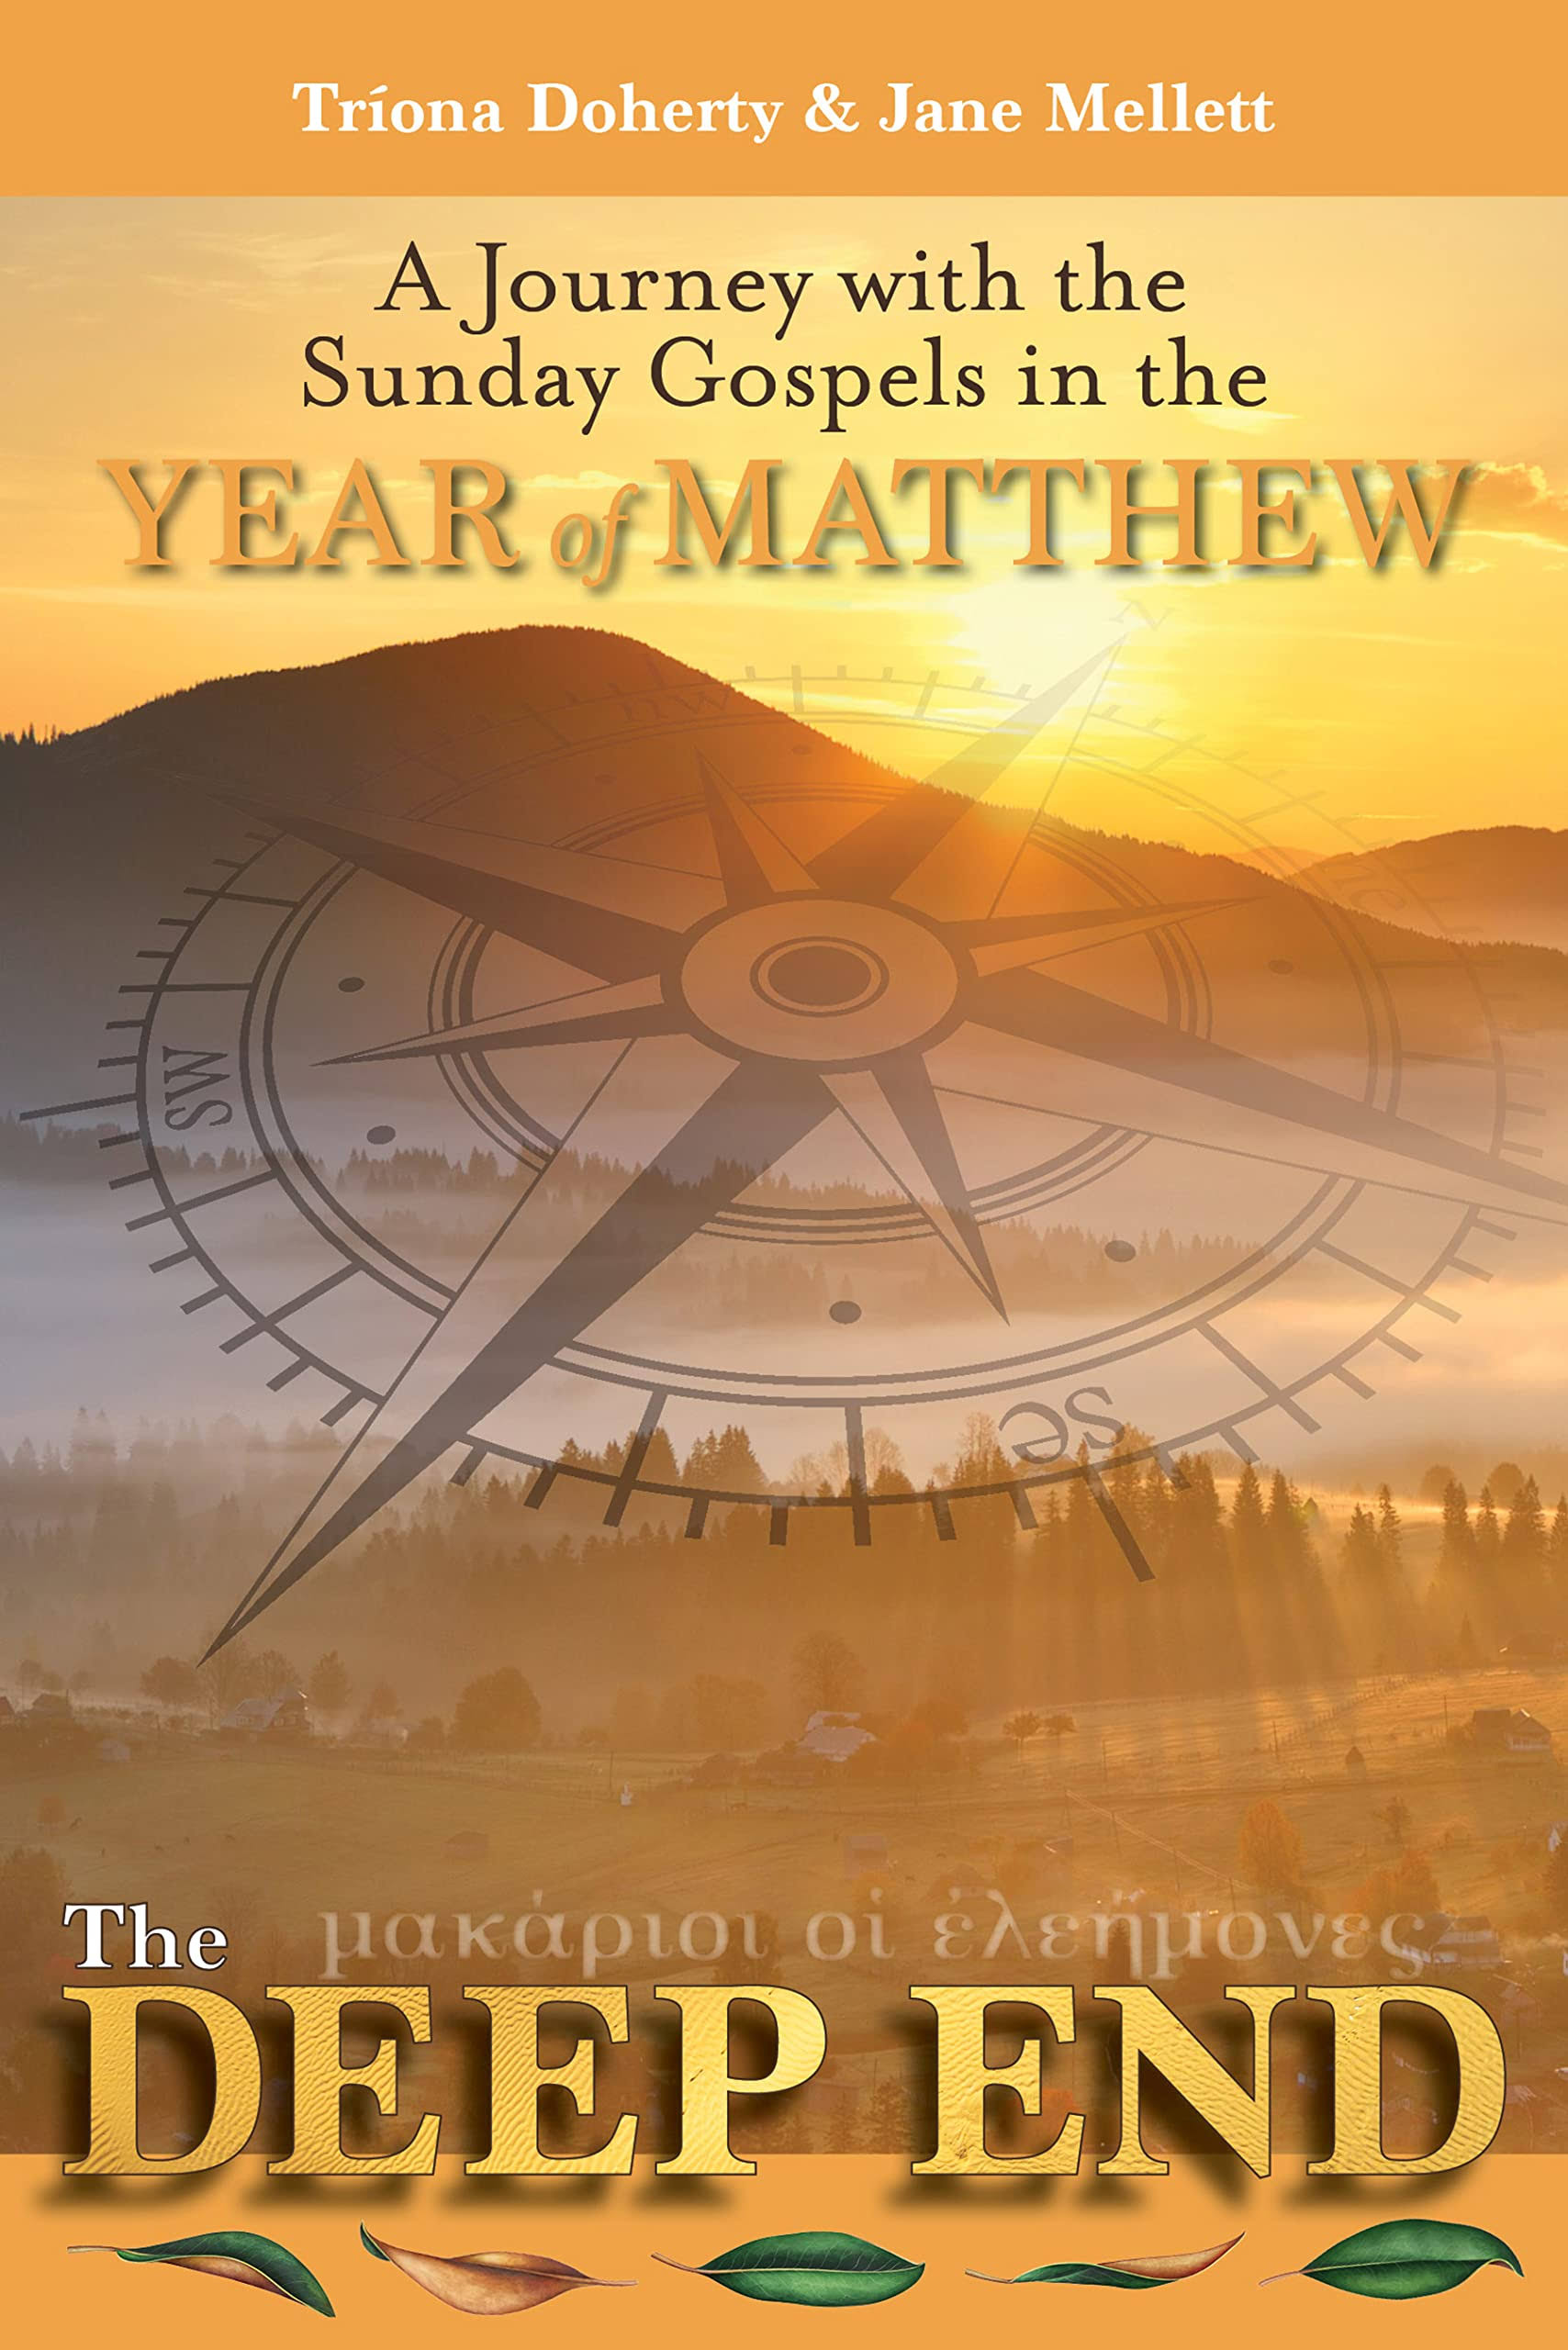 The Deep End: A Journey with the Sunday Gospels in the Year of Matthew [Book]